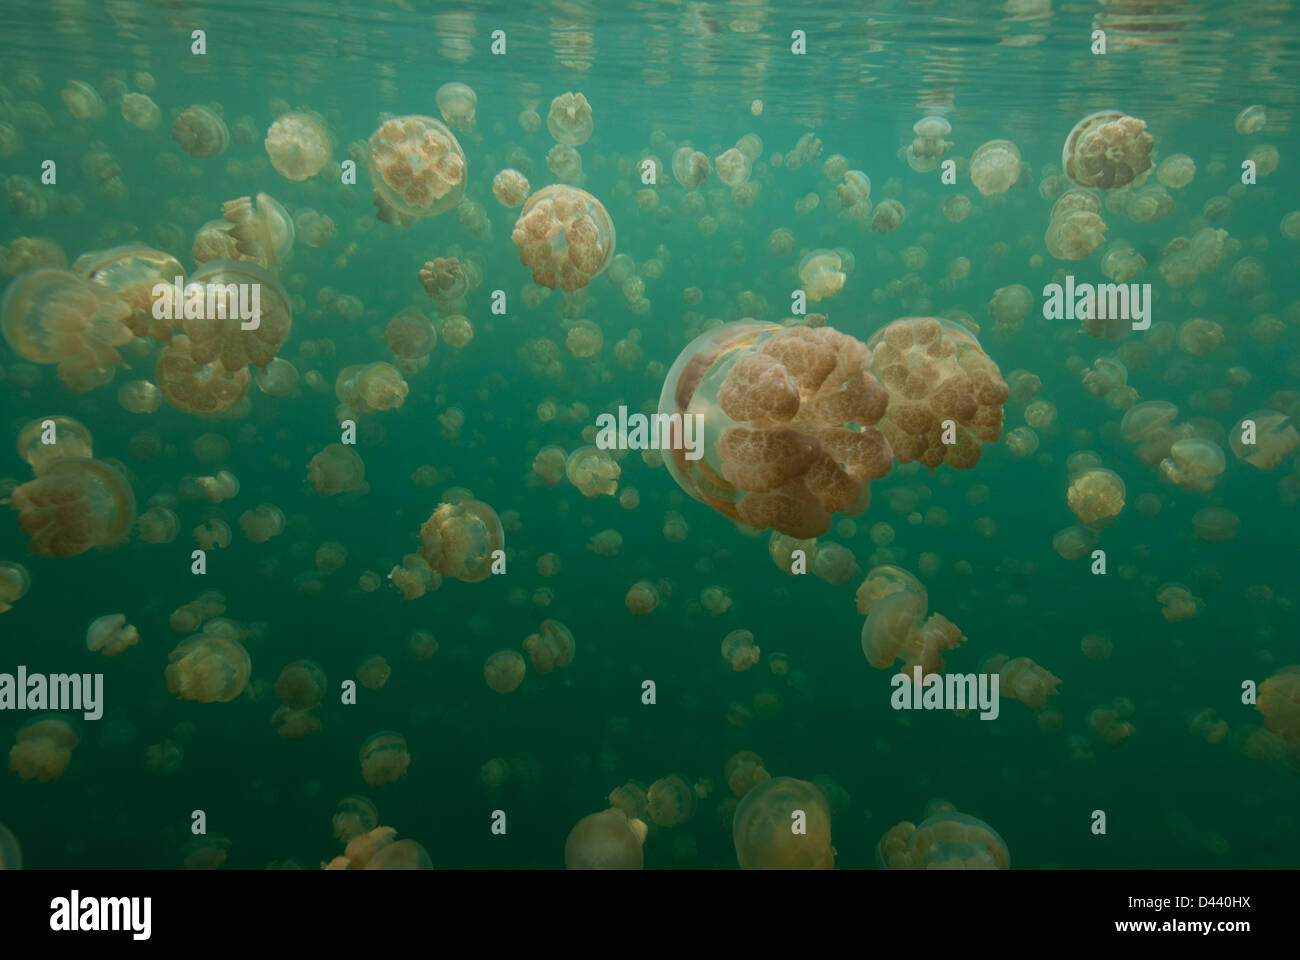 Large Group of Stingless Jellyfish (Ornate Cassiopeia) Underwater, close to the Surface, Palau, Micronesia Stock Photo